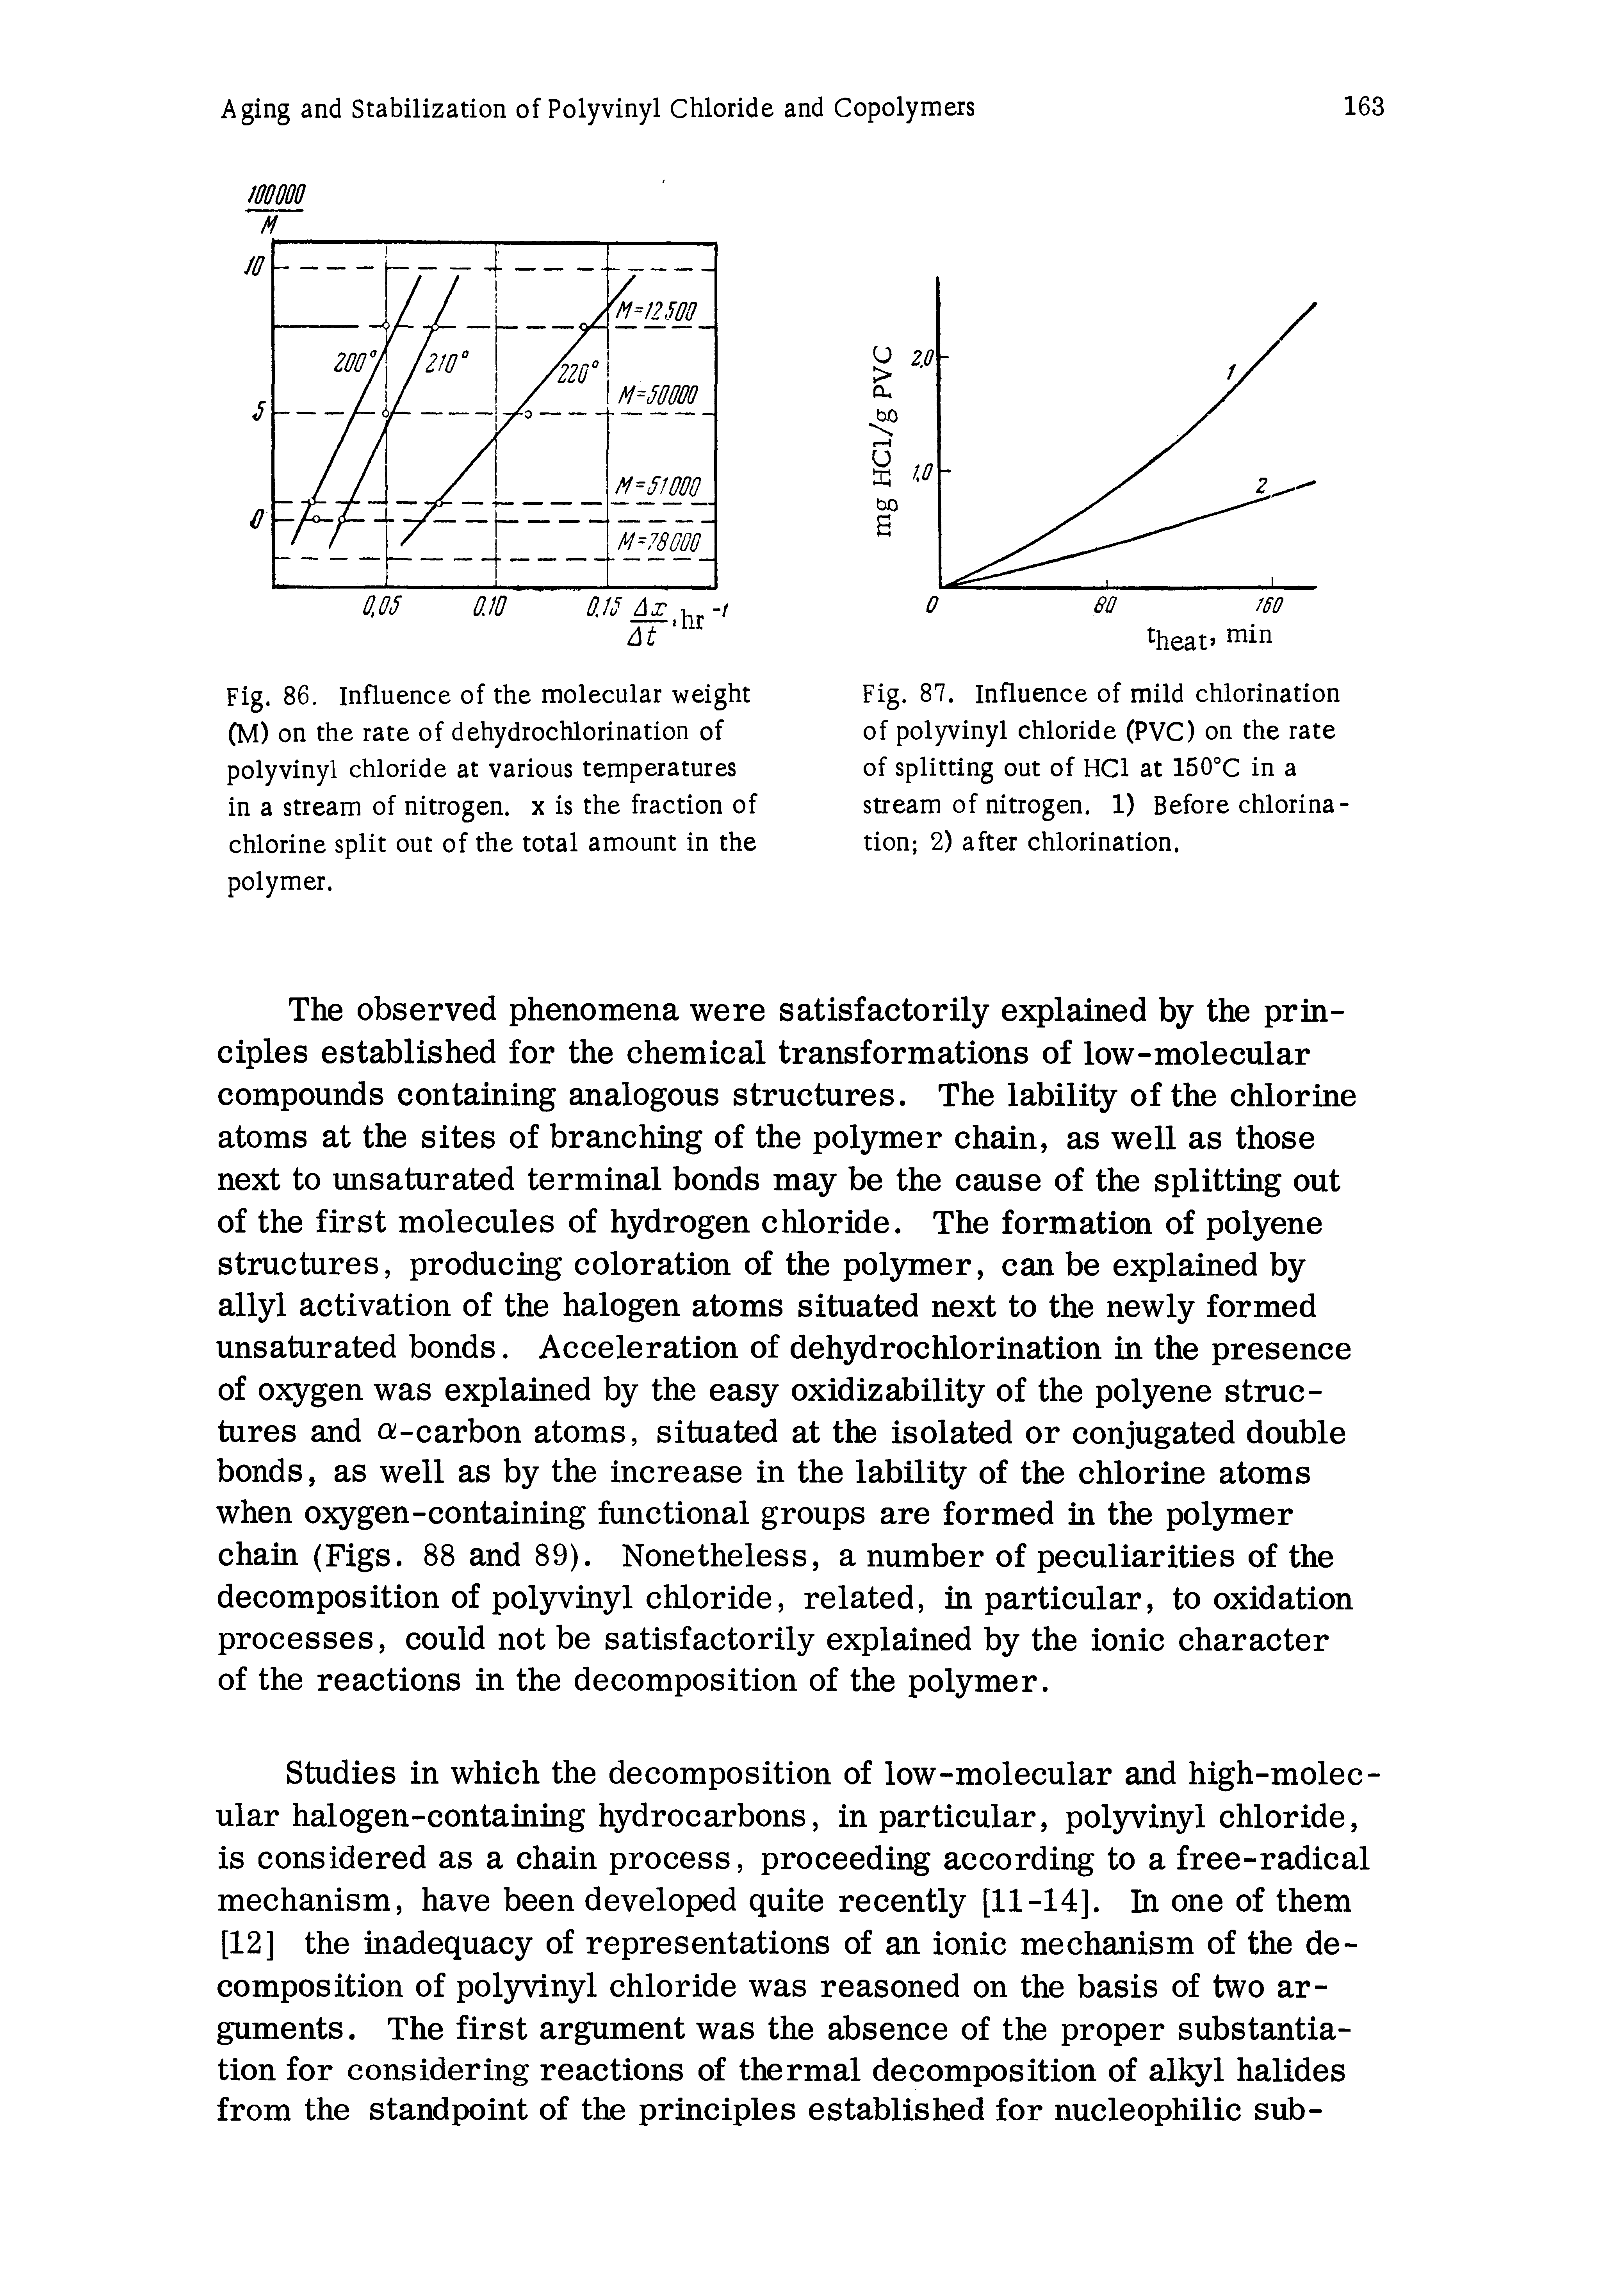 Fig. 86. Influence of the molecular weight (M) on the rate of dehydrochlorination of polyvinyl chloride at various temperatures in a stream of nitrogen, x is the fraction of chlorine split out of the total amount in the polymer.